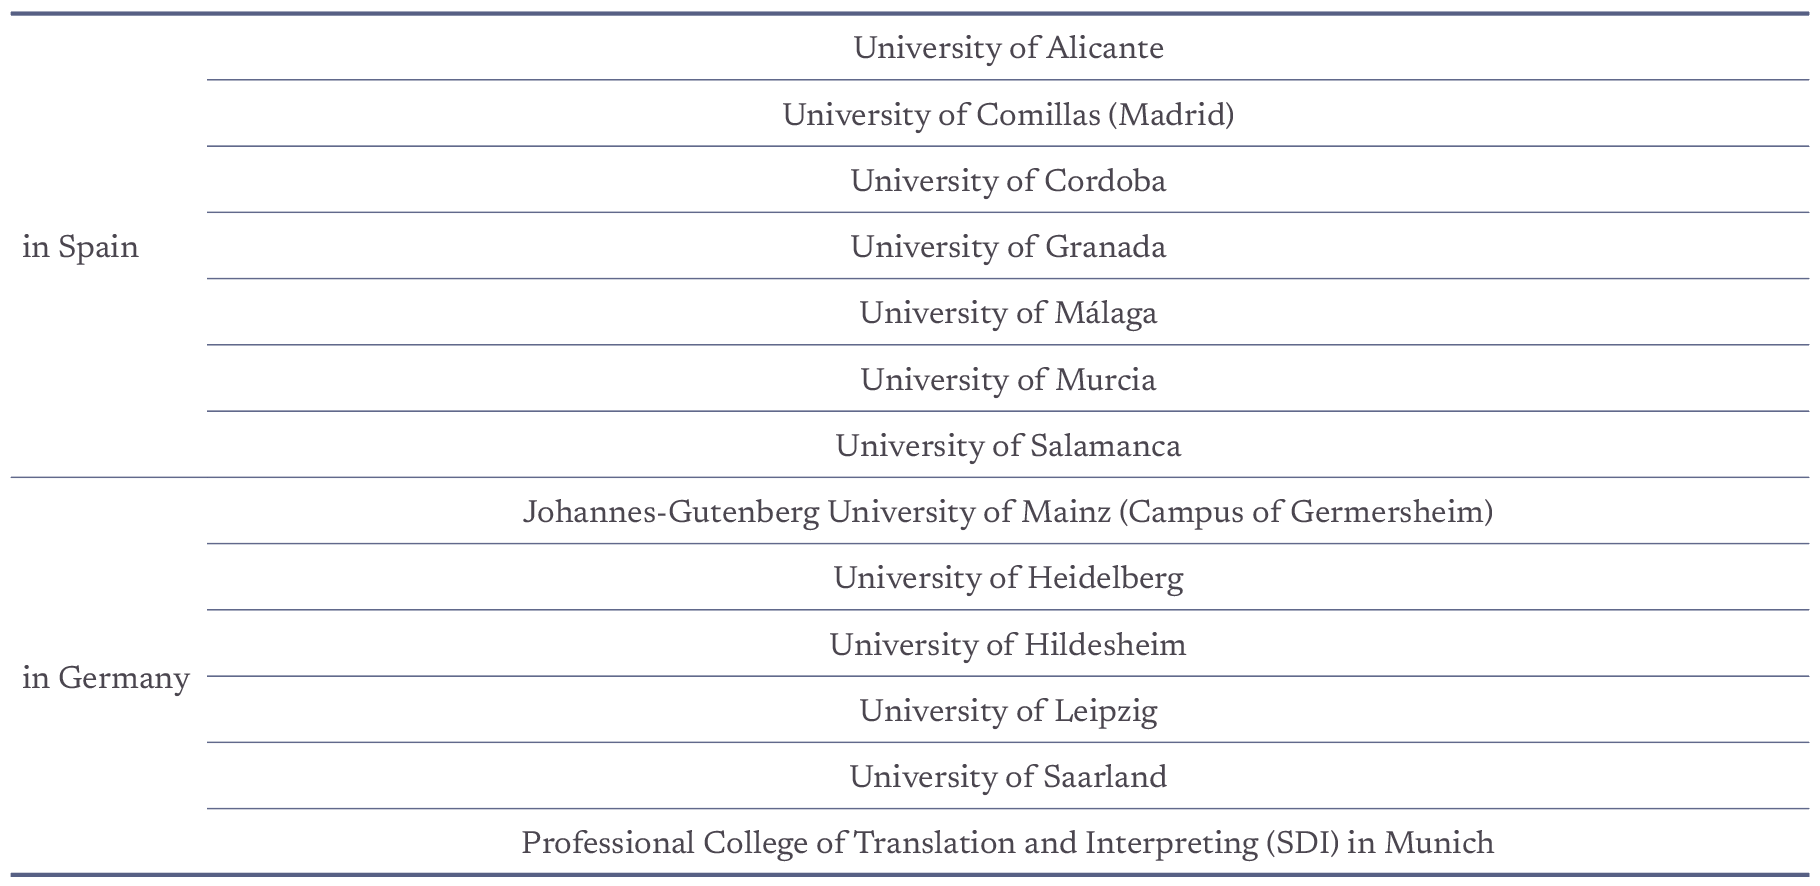 Universities examined in this article. Source: Authors’ elaboration